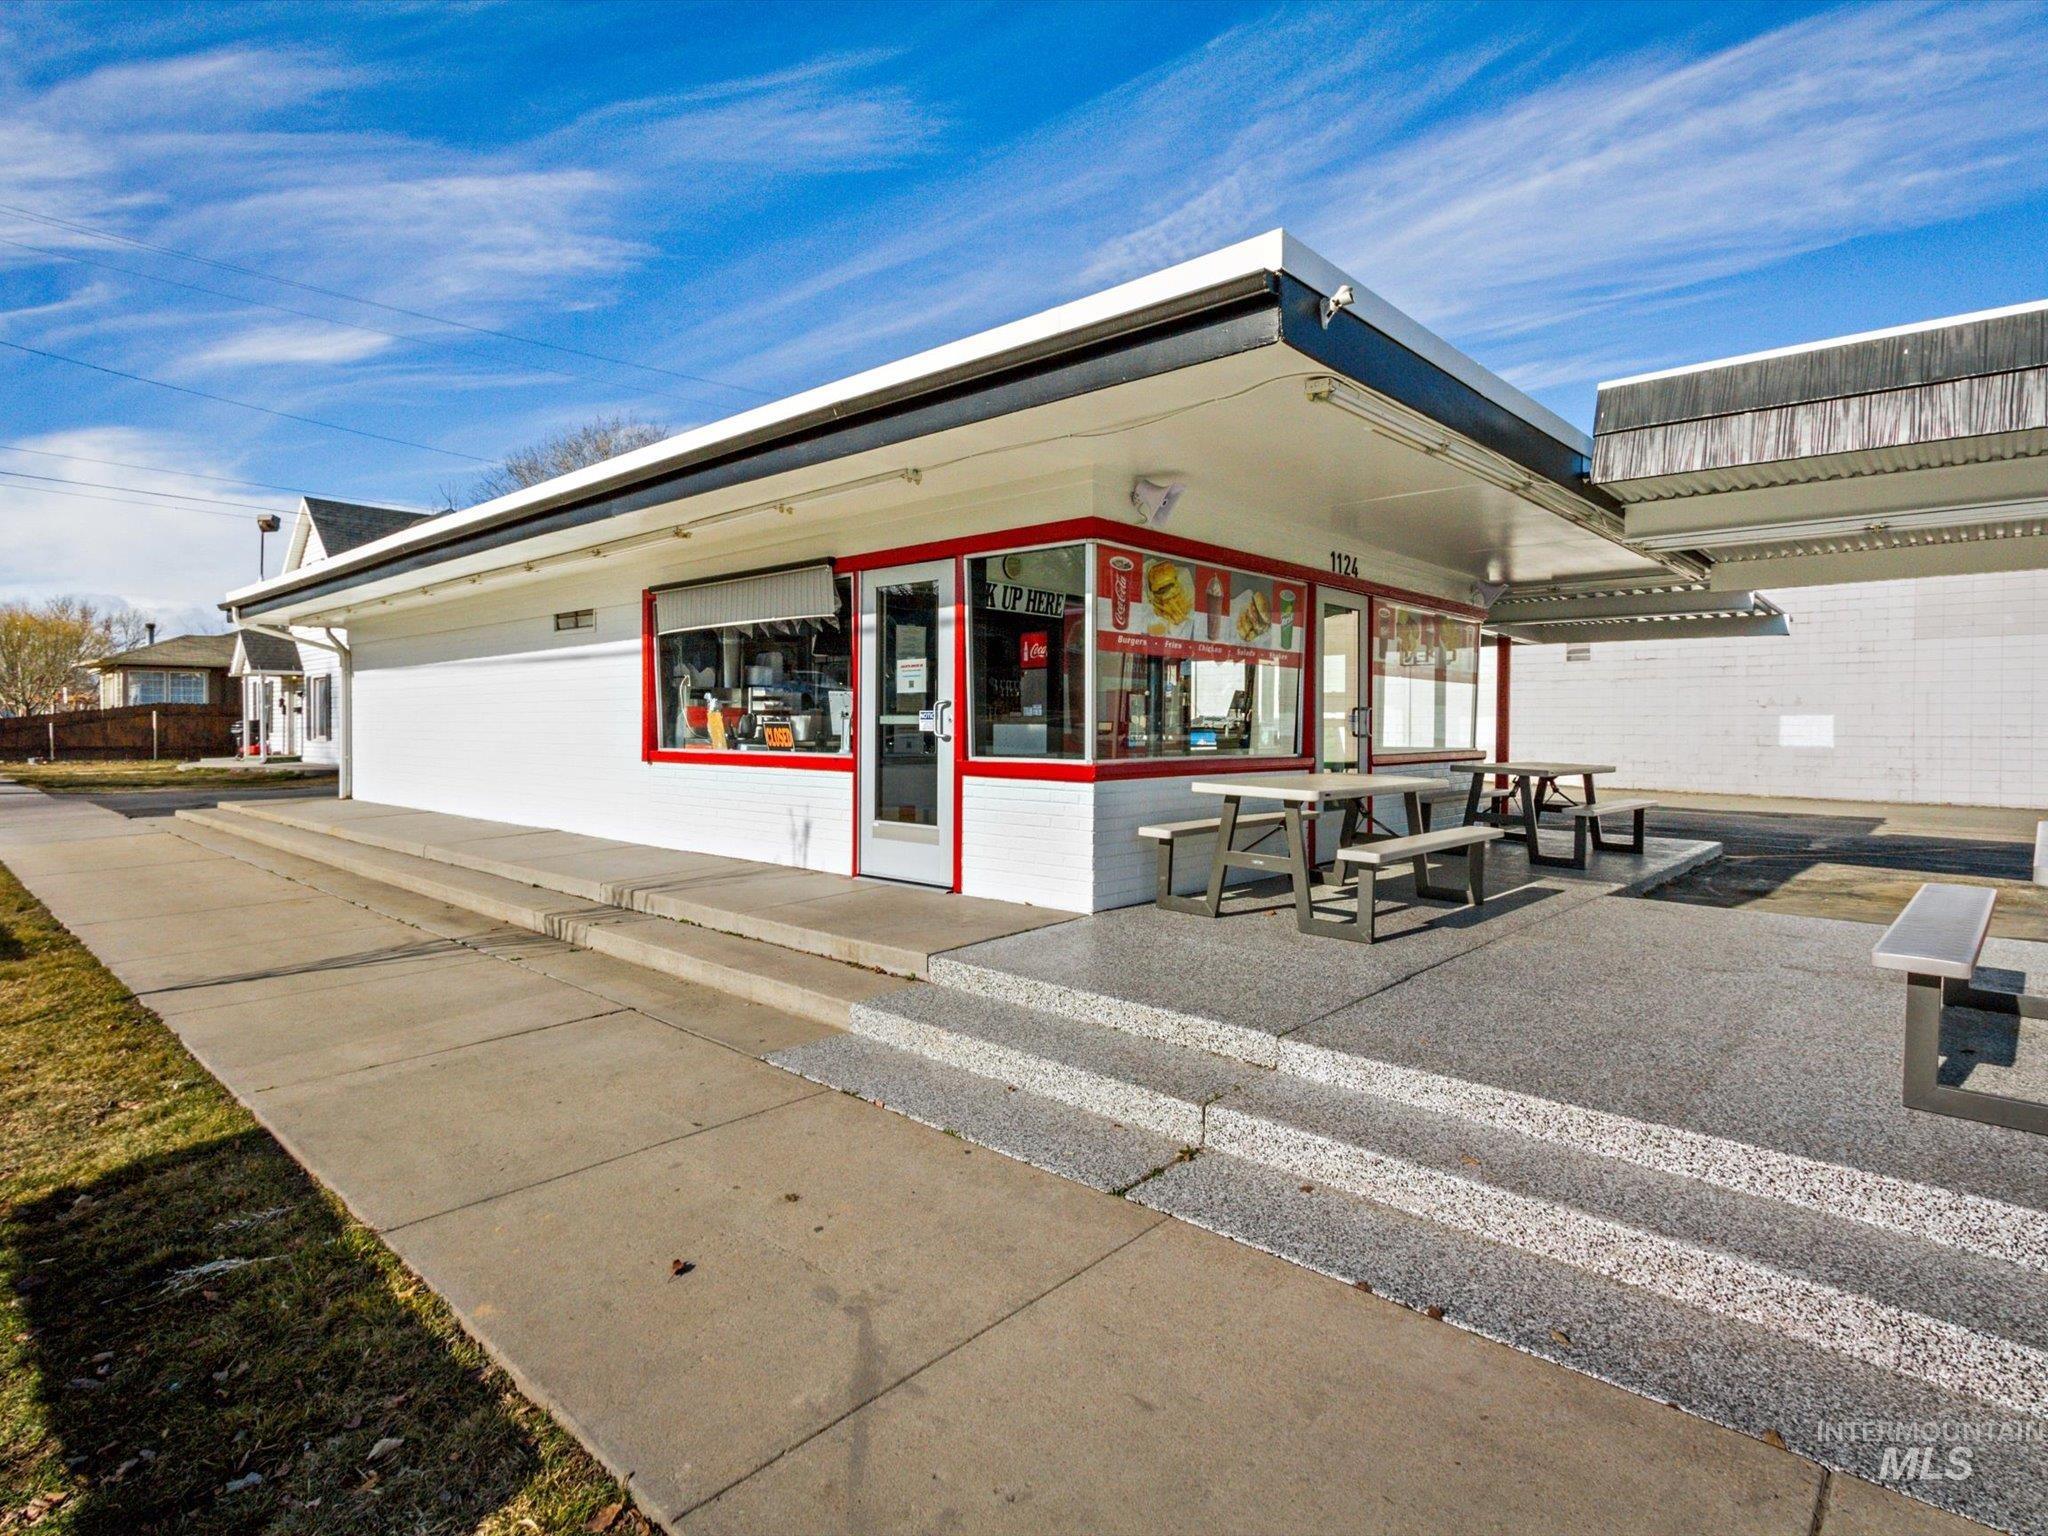 1124 Cleveland, Caldwell, Idaho 83607, Business/Commercial For Sale, Price $620,000,MLS 98847131